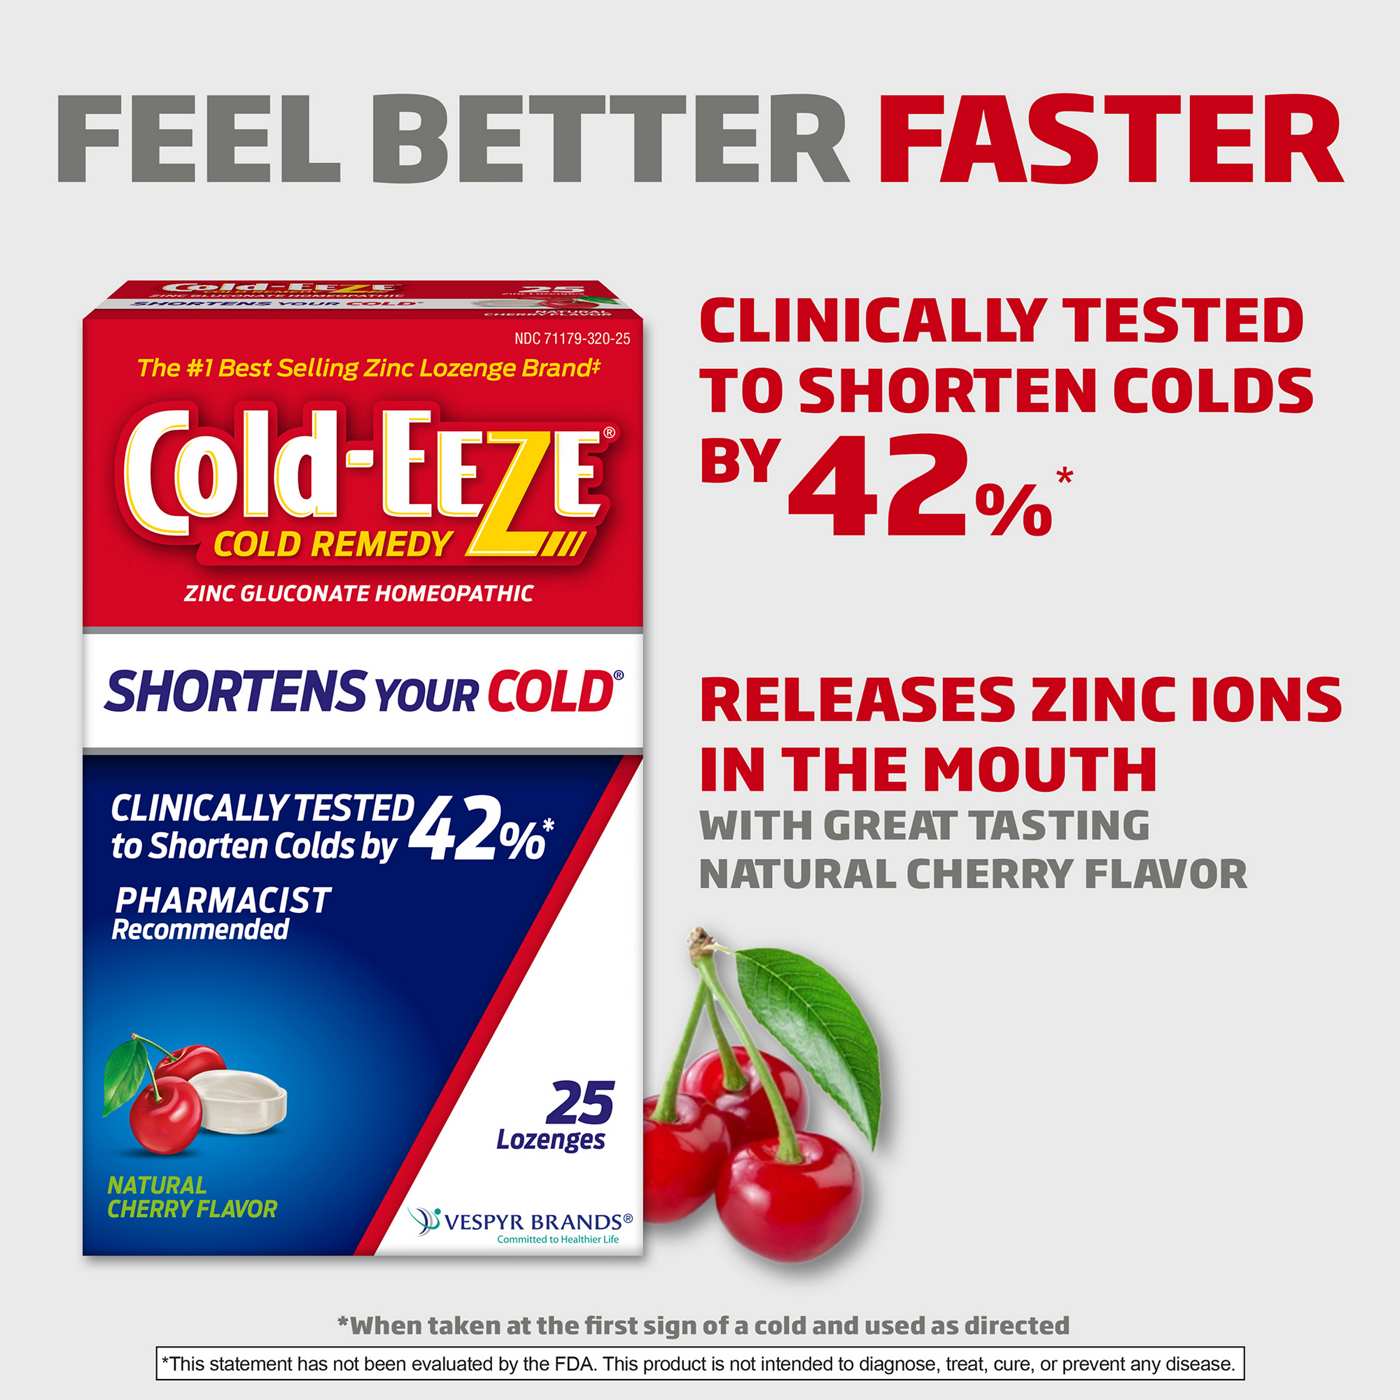 Cold-EEZE Cold Remedy Zinc Lozenges - Natural Cherry; image 7 of 7